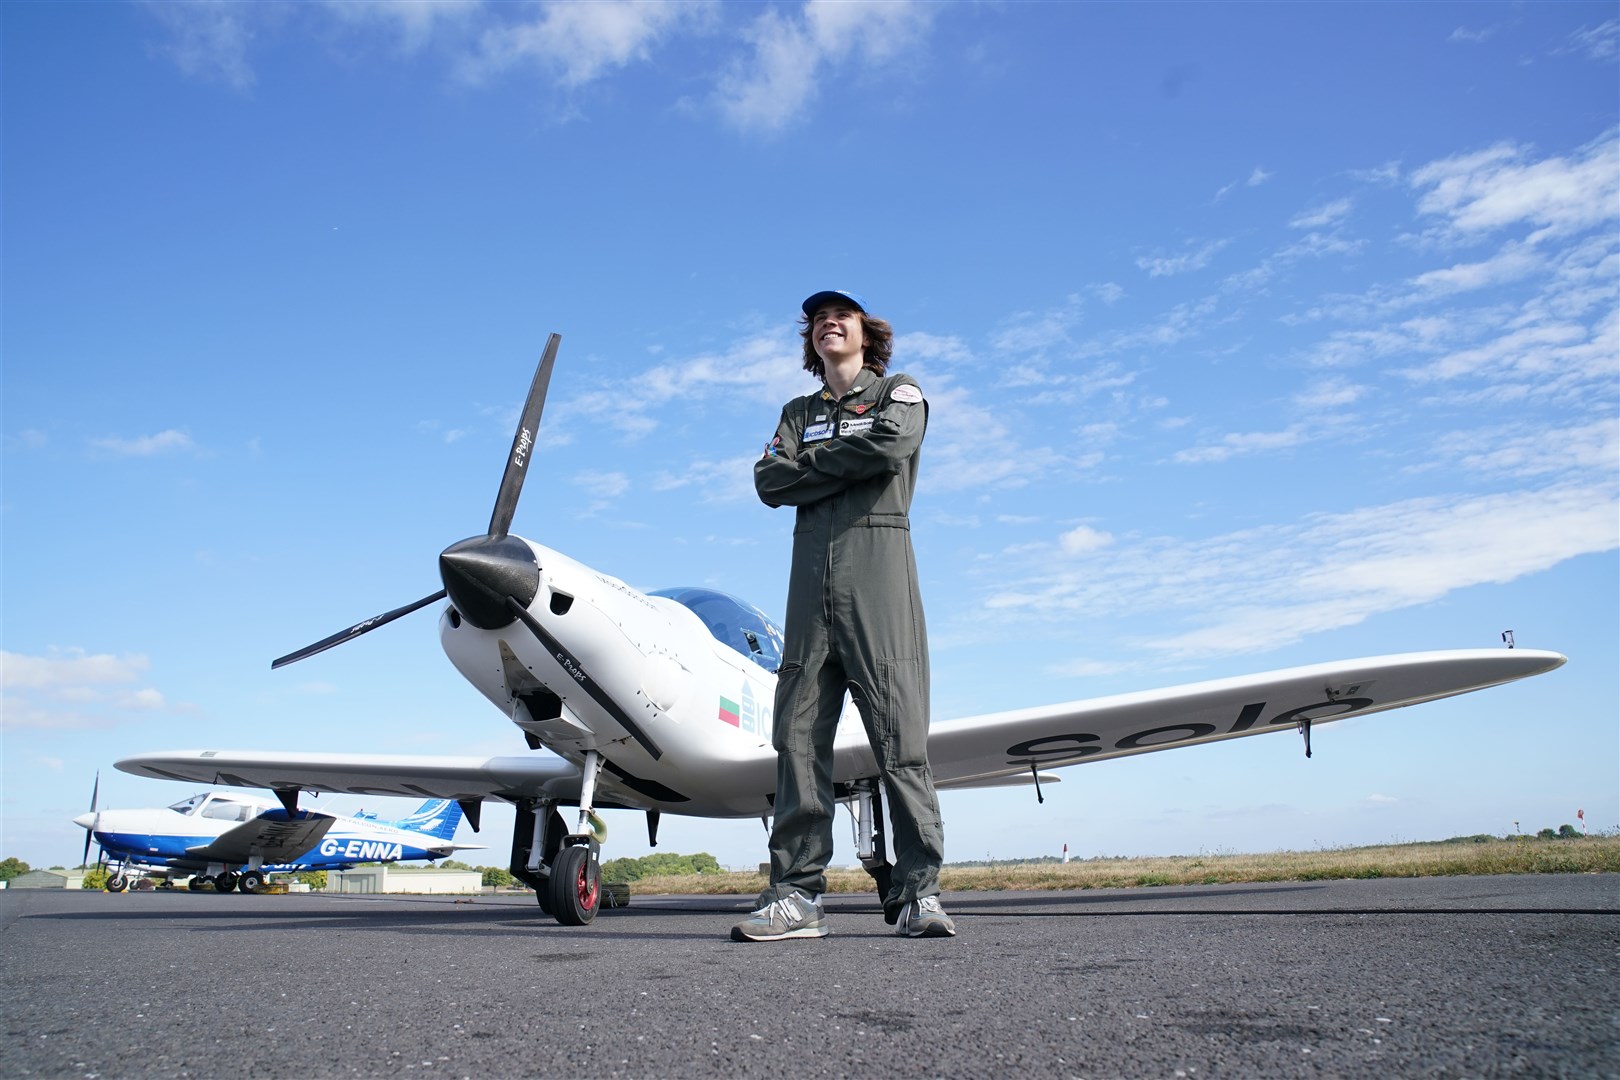 Mack Rutherford at Biggin Hill Airport during his bid to beat the Guinness World Record (Gareth Fuller/PA)